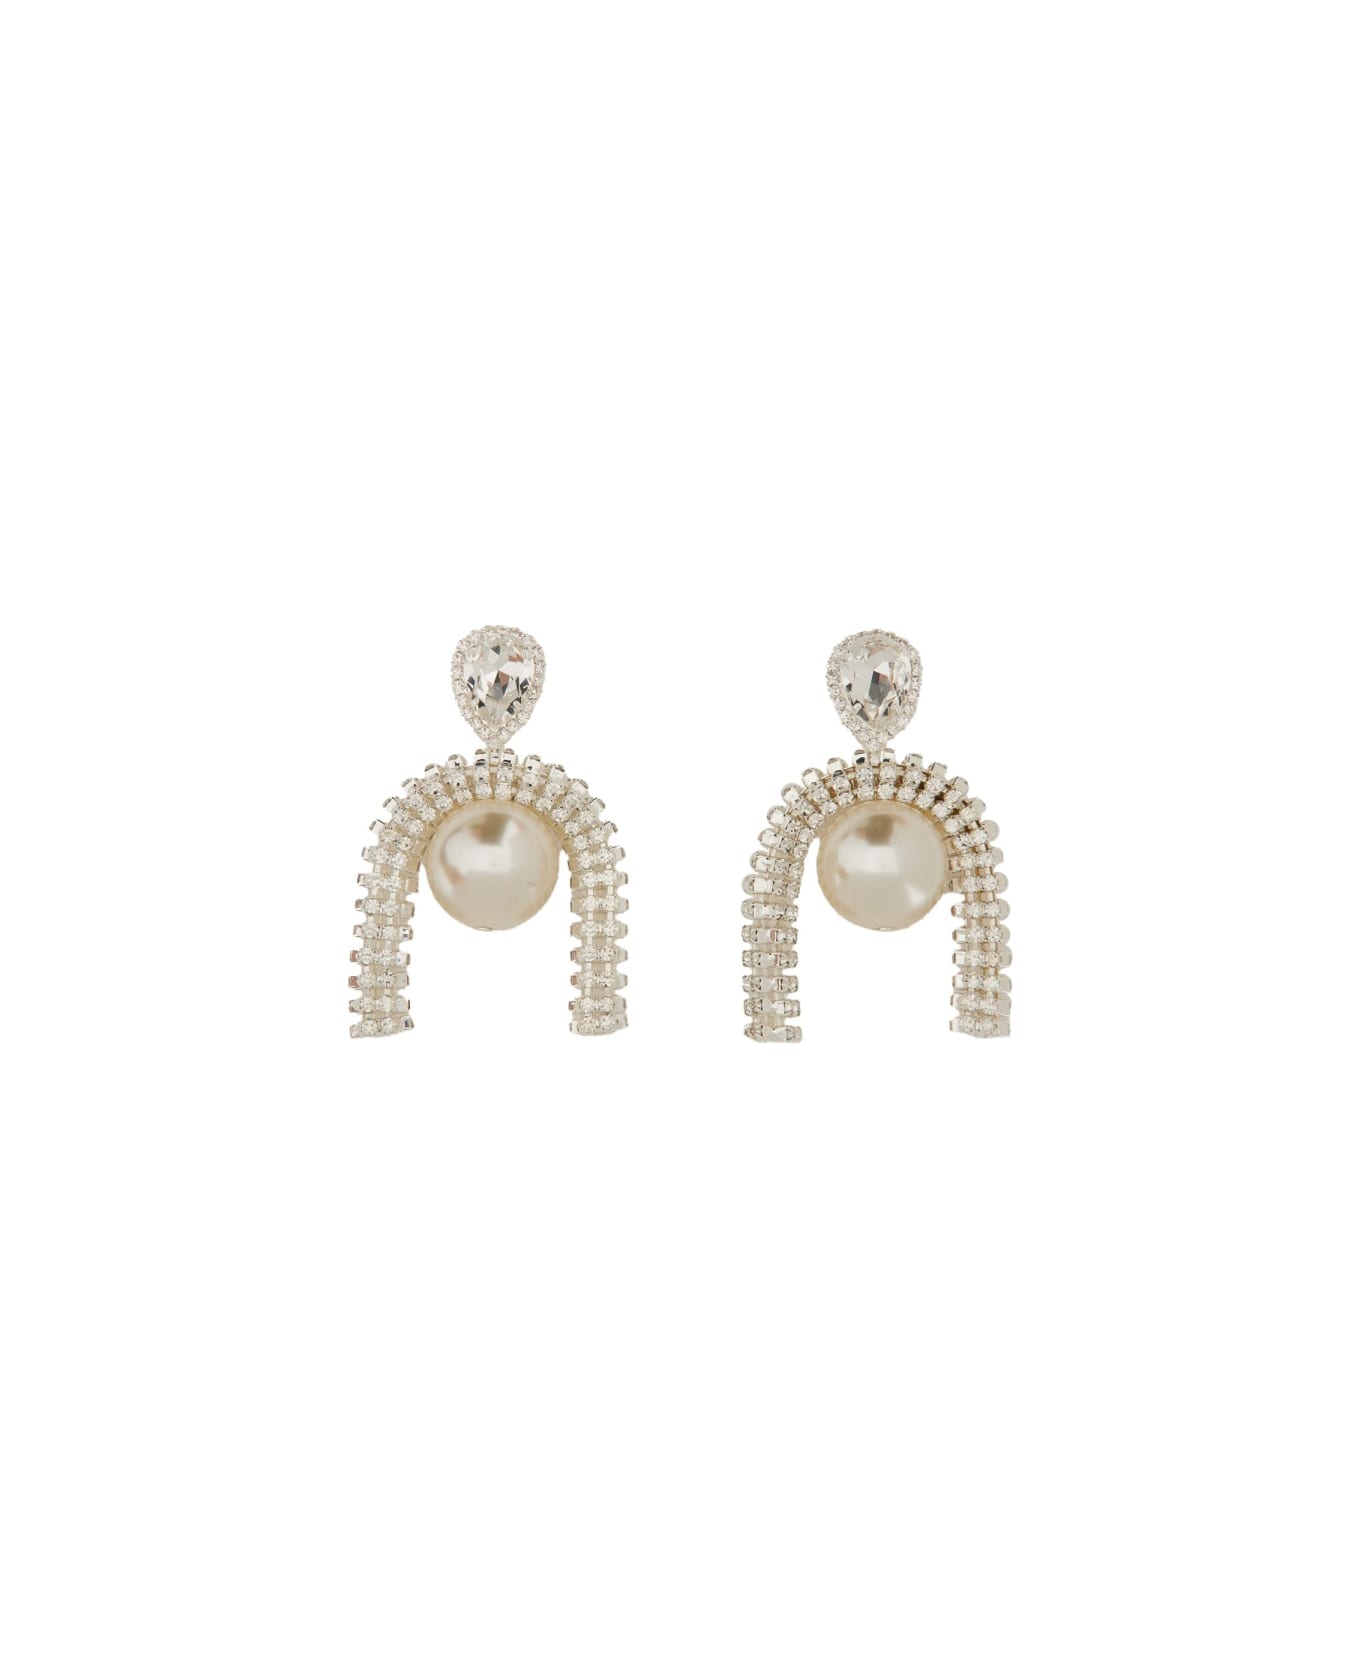 Magda Butrym Earrings With Pendants - SILVER イヤリング